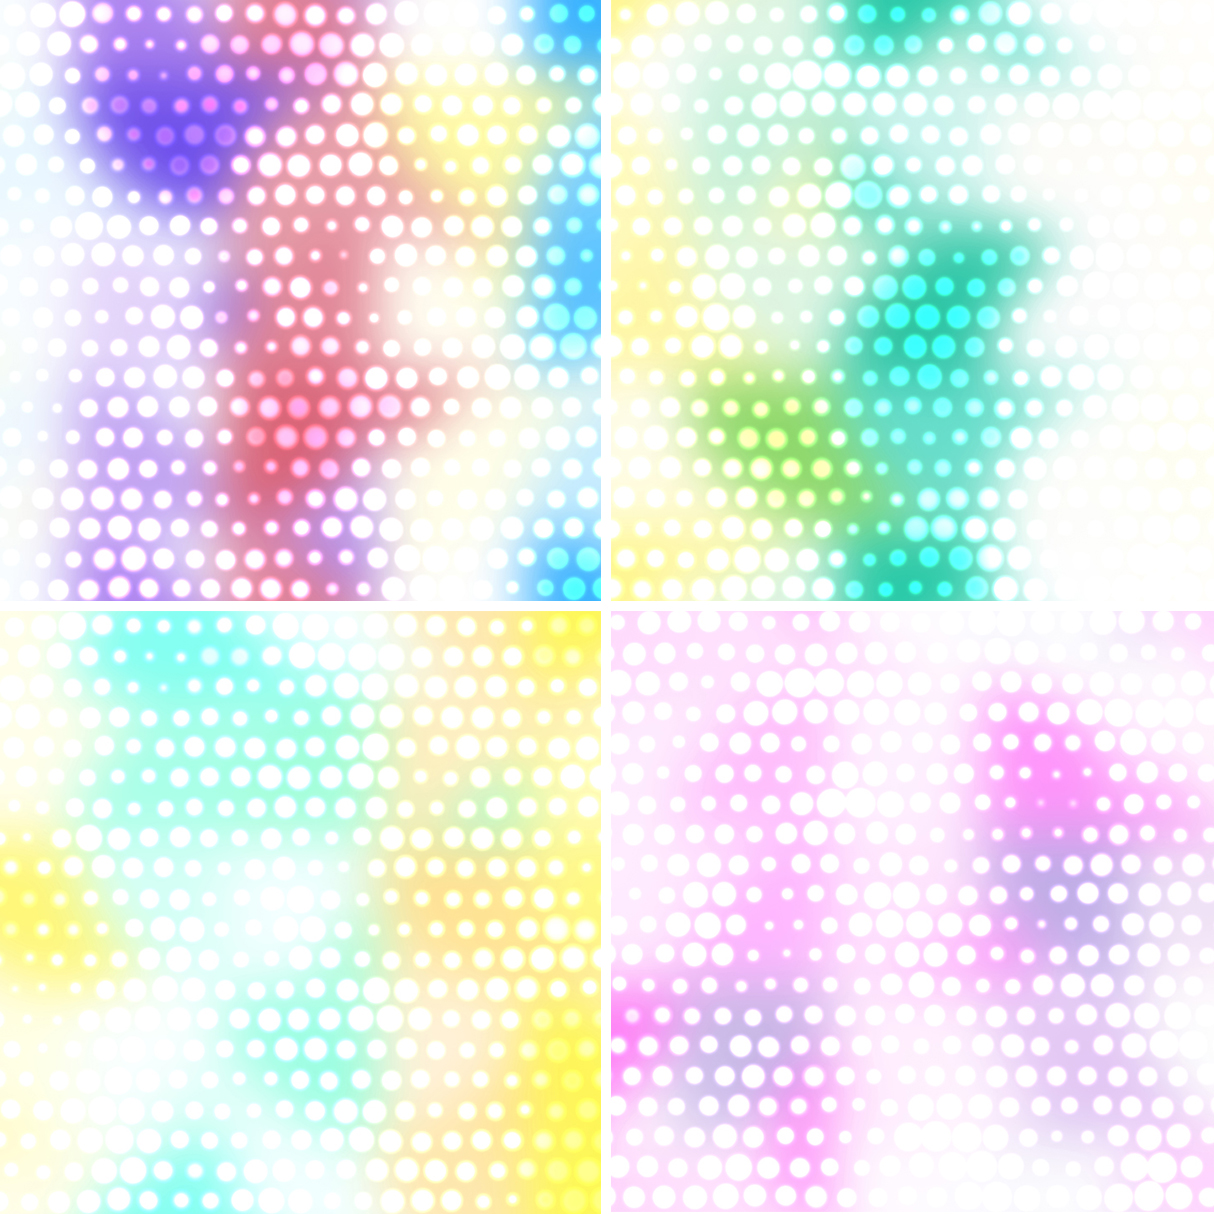 50 Shining Dotty Backgrounds Samples Preview – Part 5